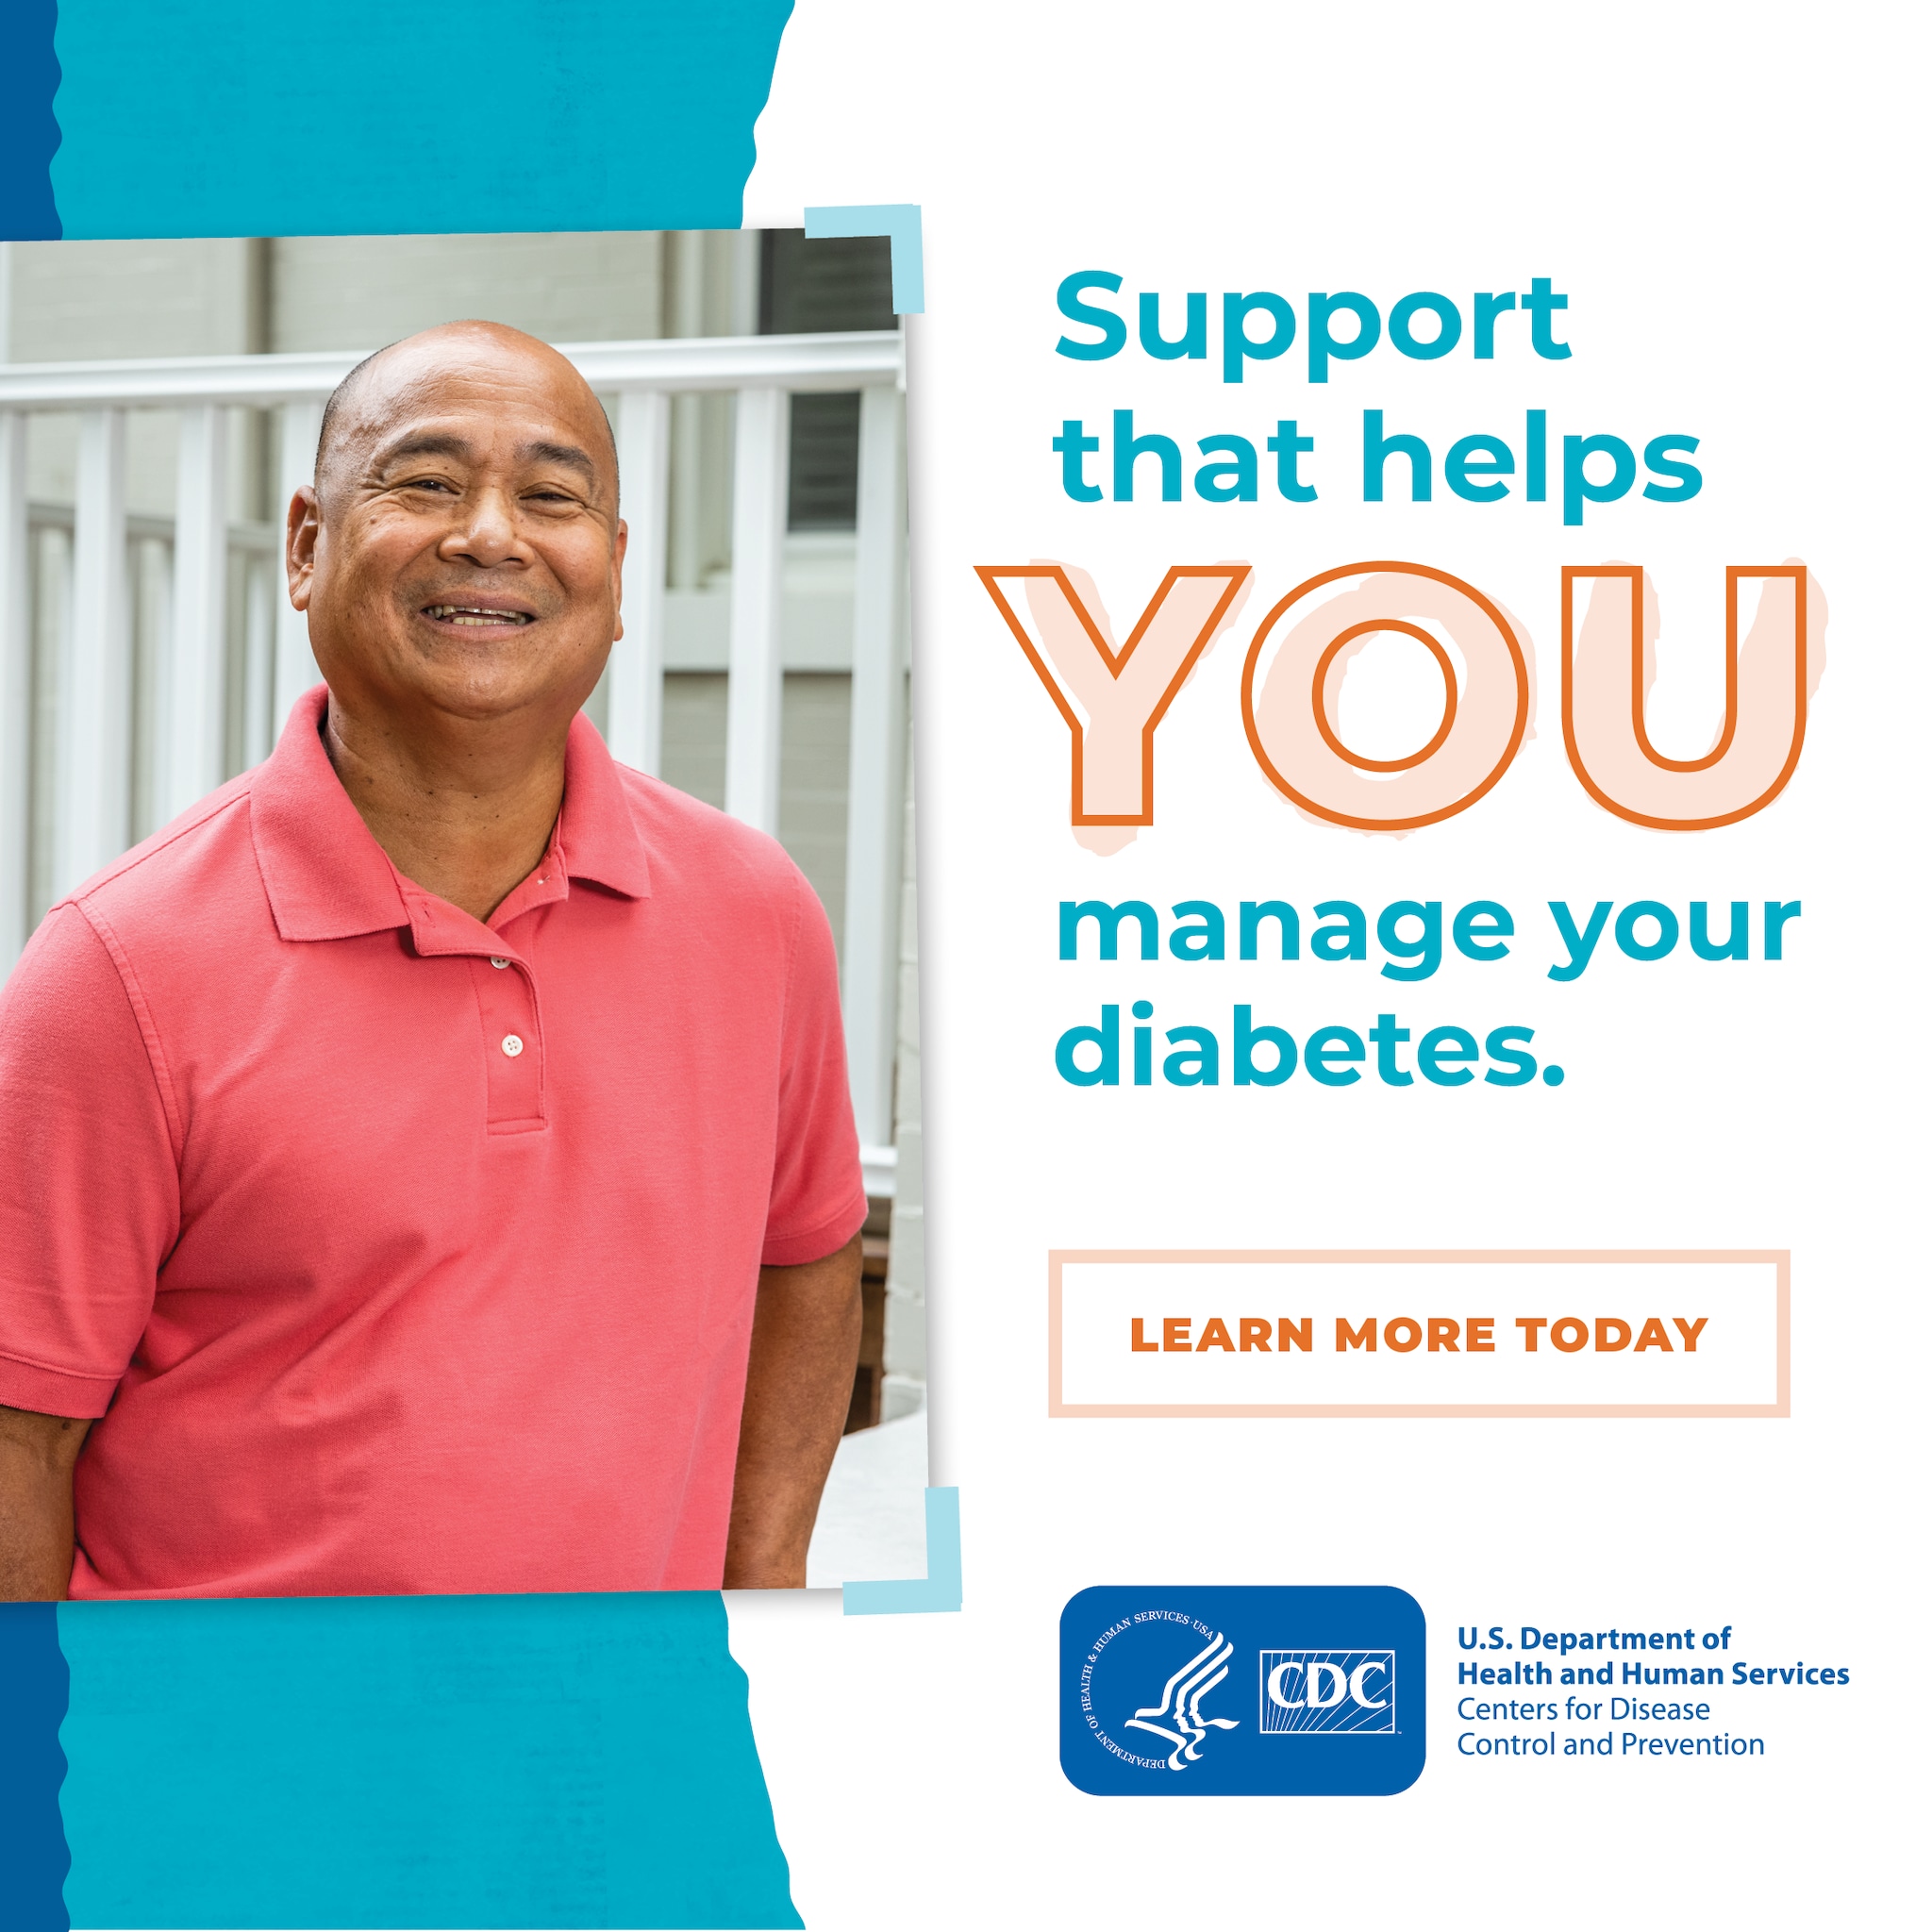 Support that helps you manage your diabetes. Learn more today. CDC logo.